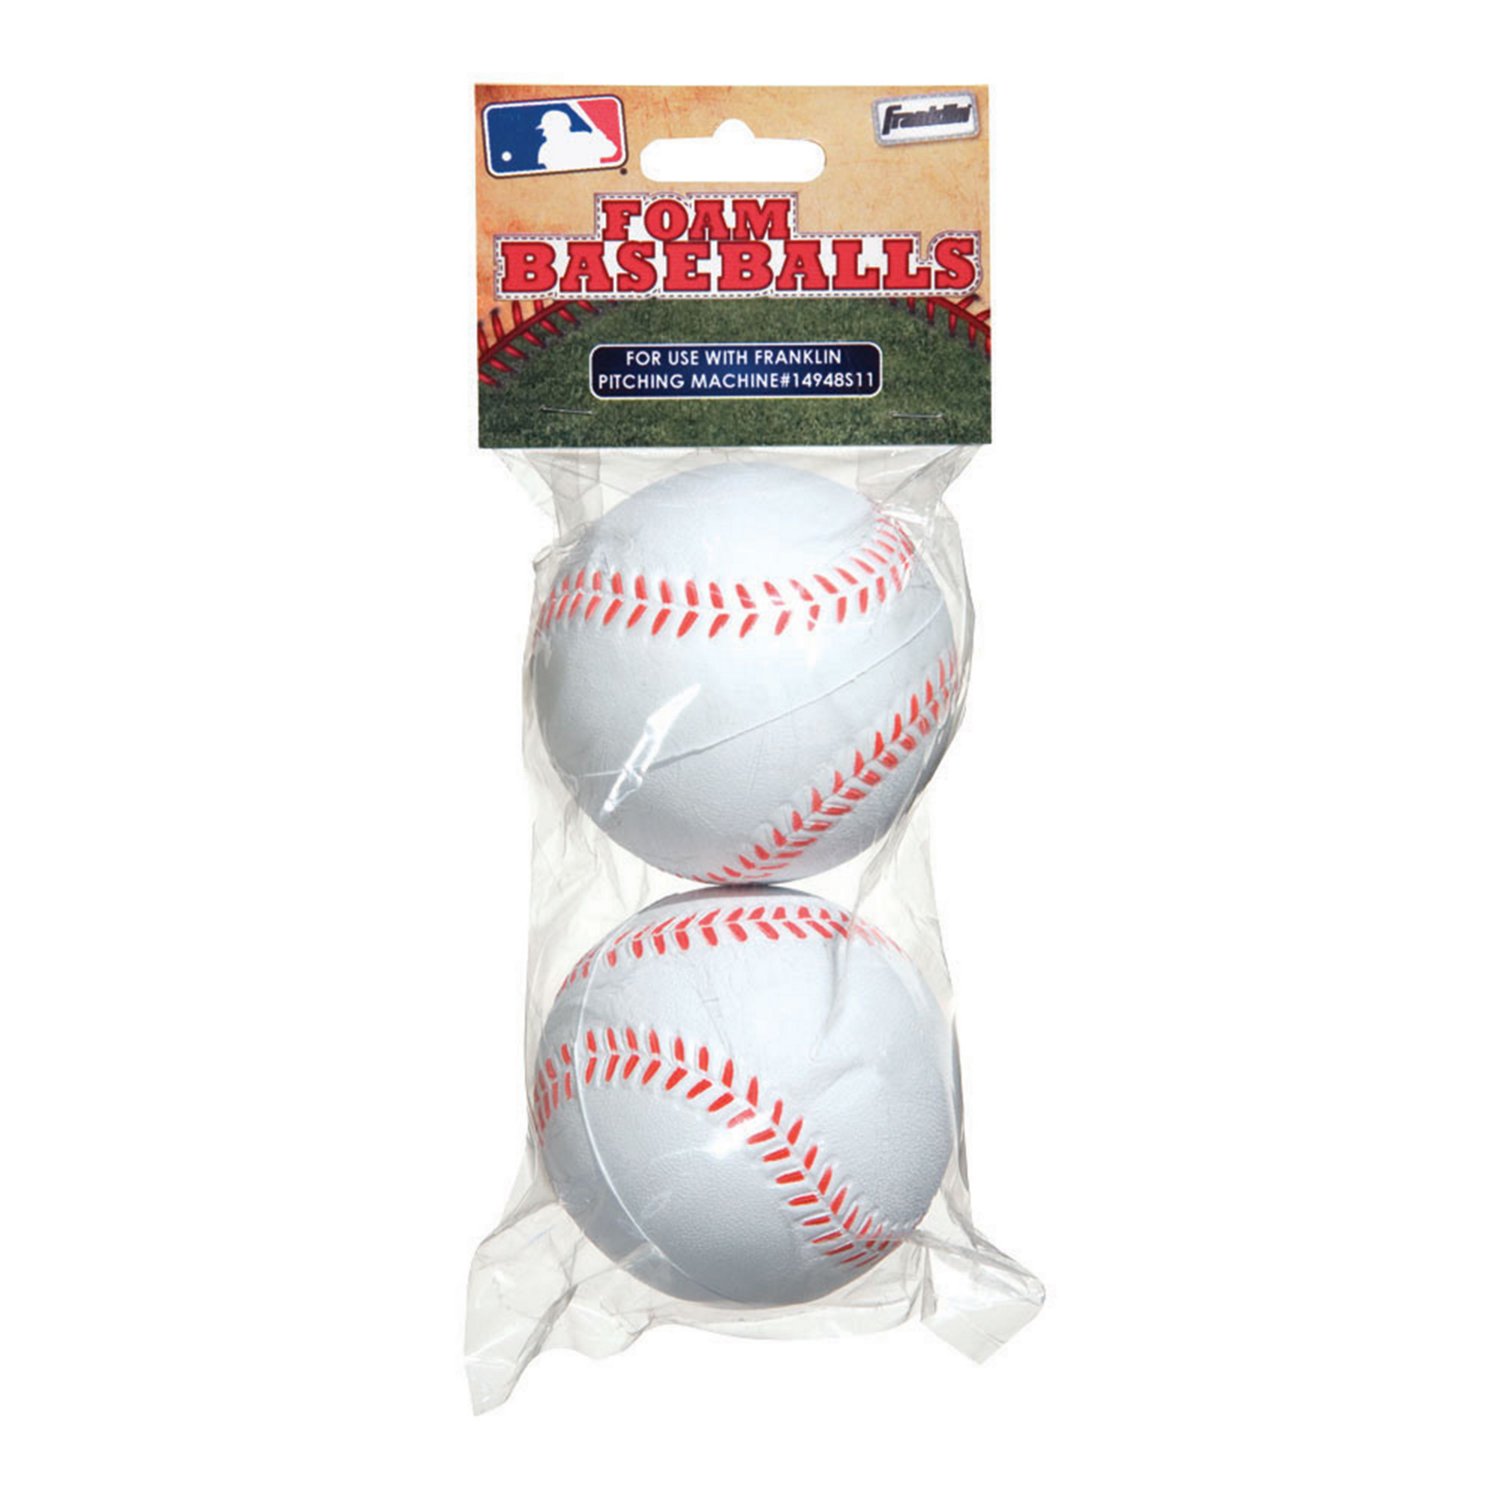 Franklin Replacement Pitching Machine Balls 2-Pack